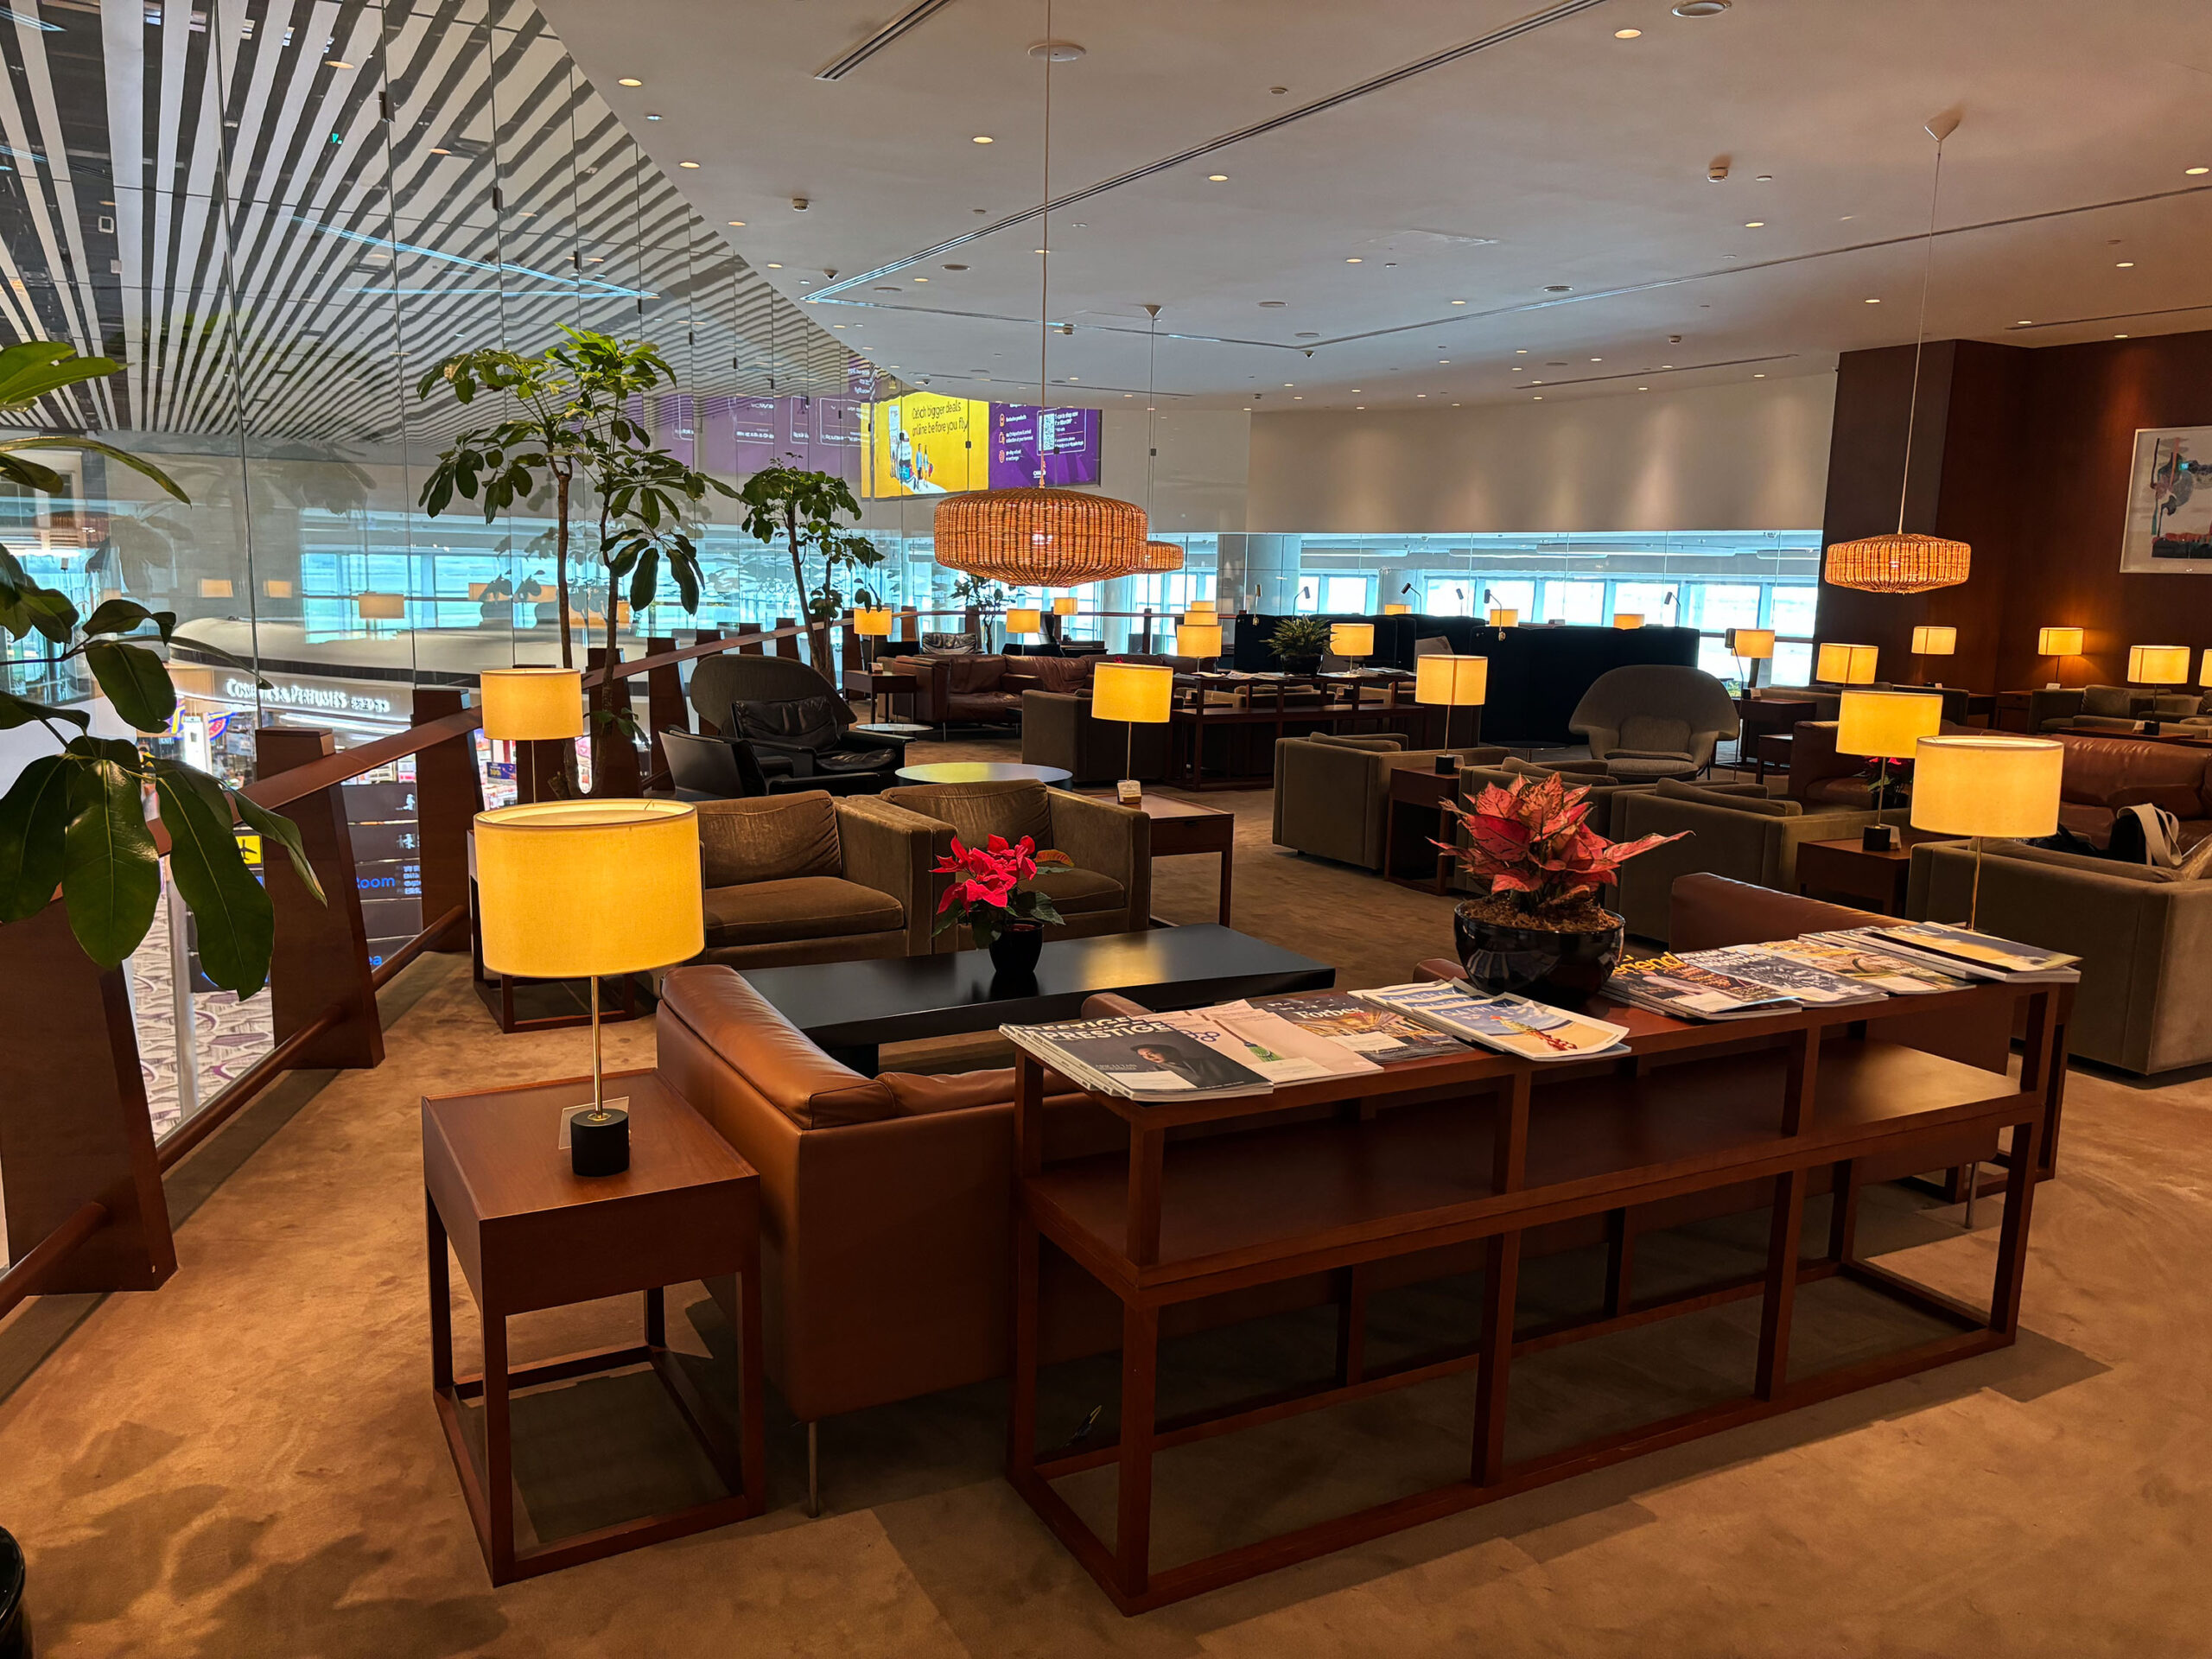 Review: Cathay Pacific Lounge Singapore (SIN)